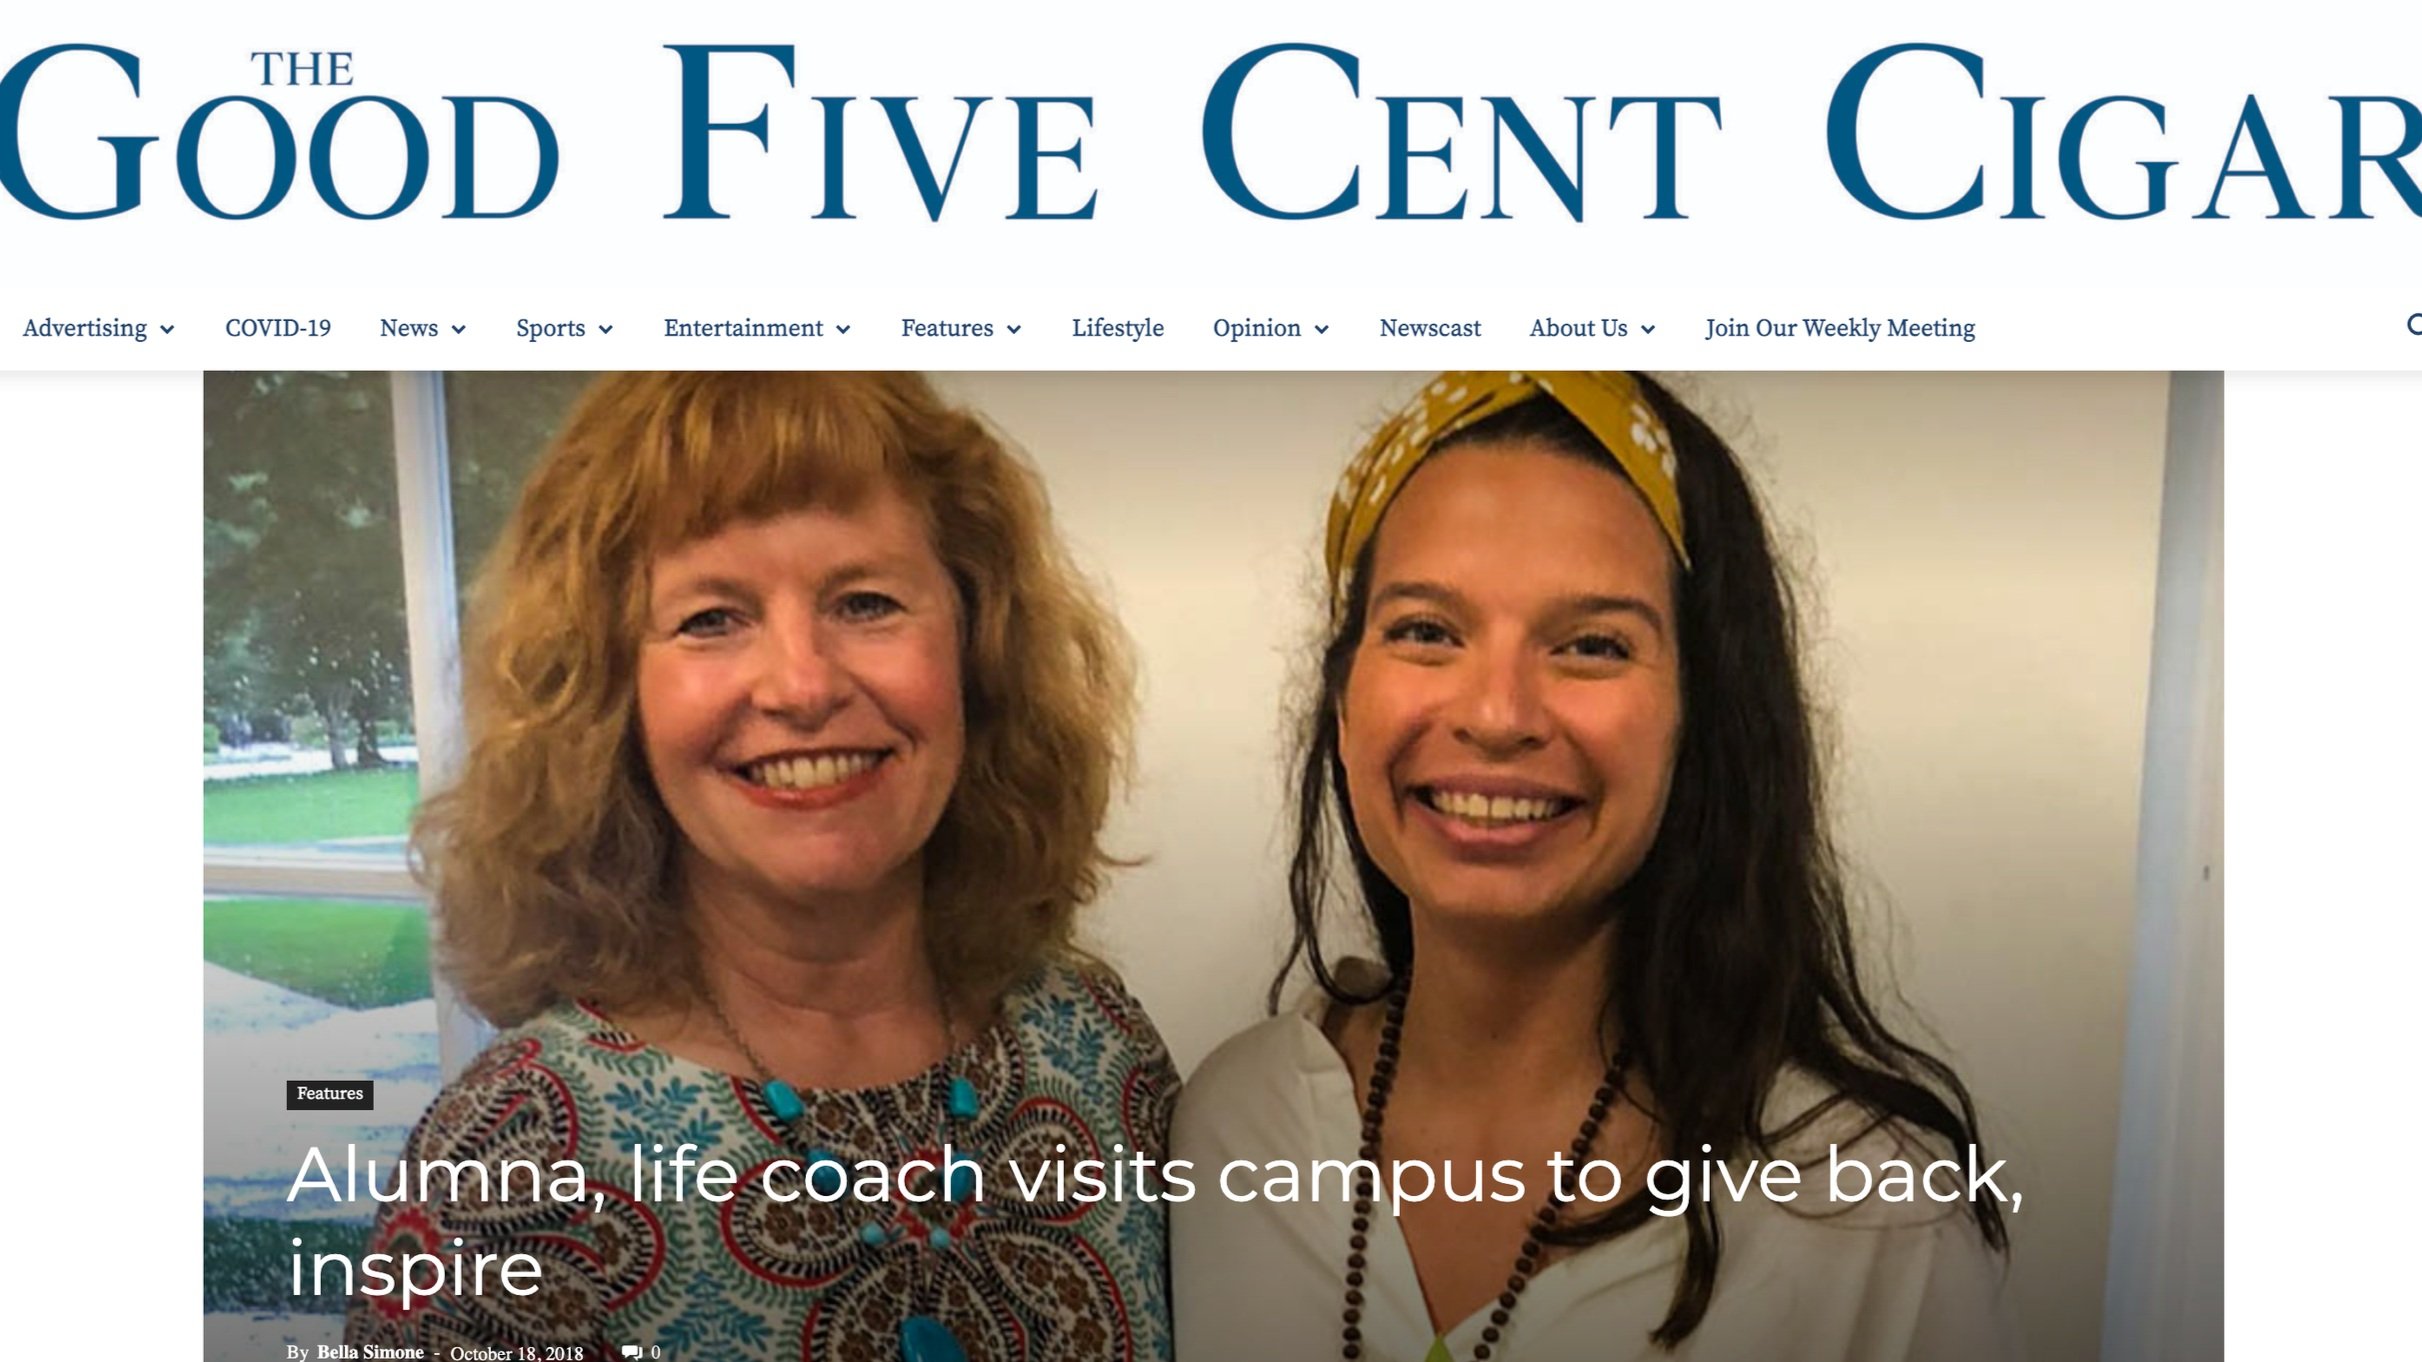 The Good Five Cent Cigar: Alumna, life coach visits campus to give back, inspire (Copy)